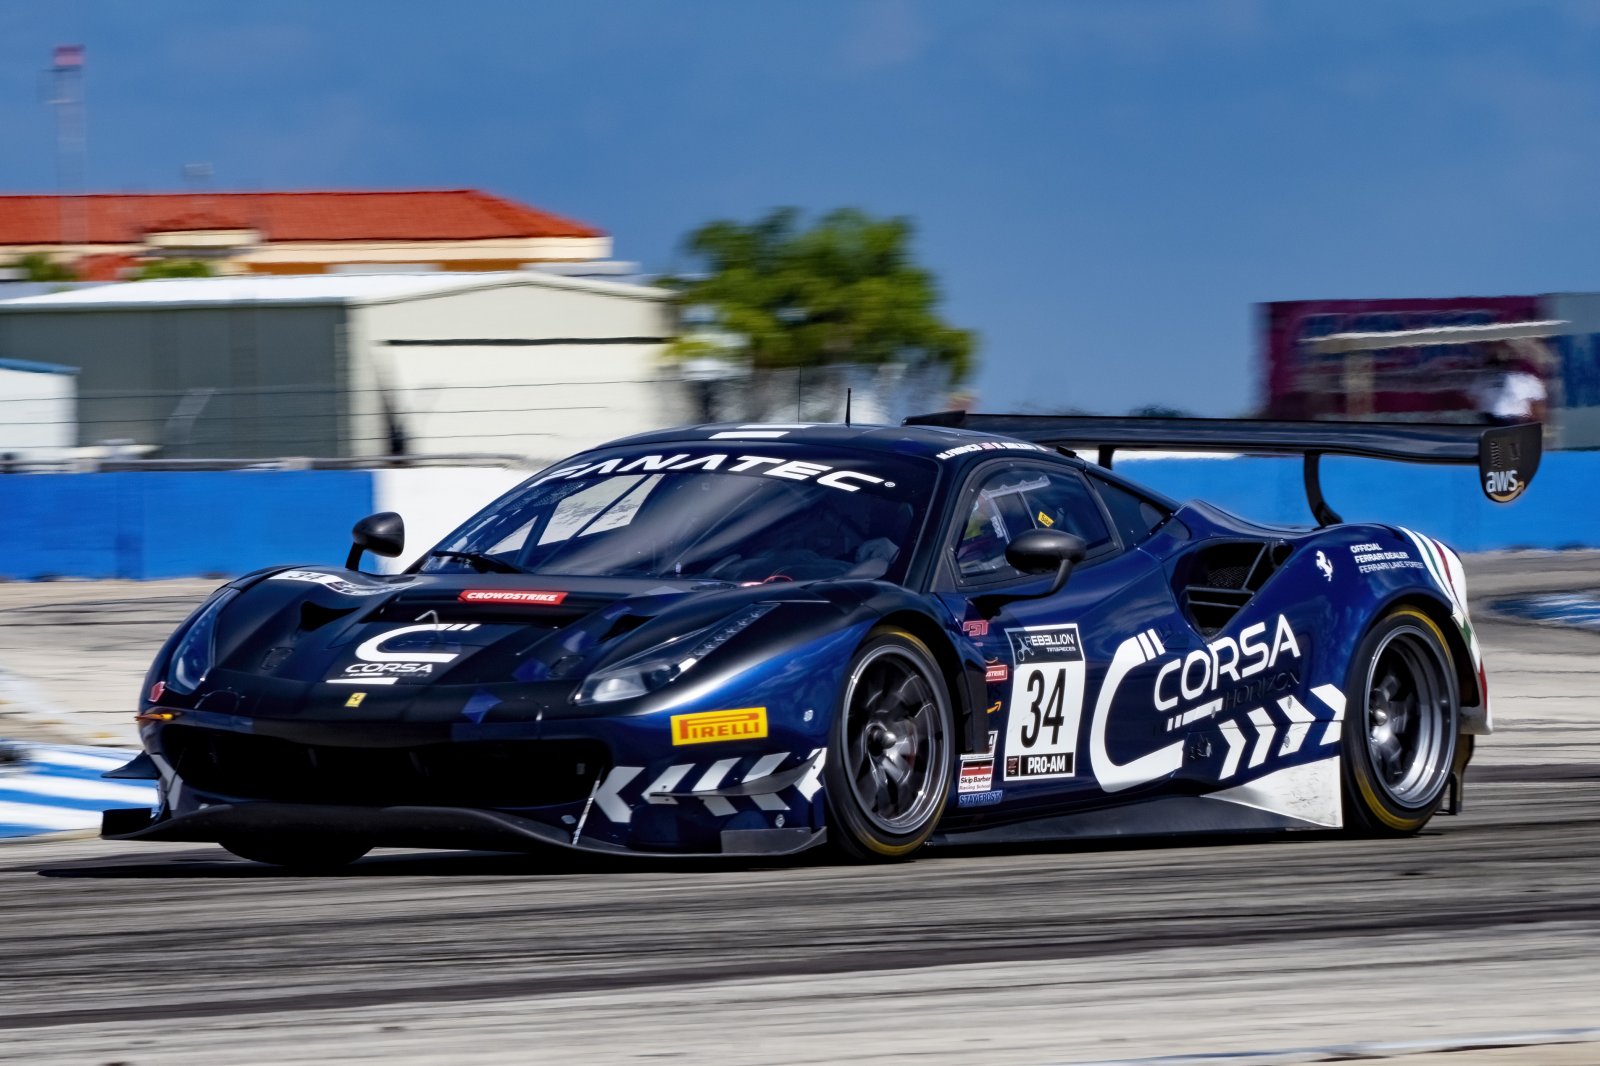 Conquest Racing Enters Final 2022 Fanatec GT World Challenge Rounds with No. 34 Conquest Racing/Corsa Horizon Ferrari 488 GT3 and Co-Drivers Manny Franco and Alessandro Balzan